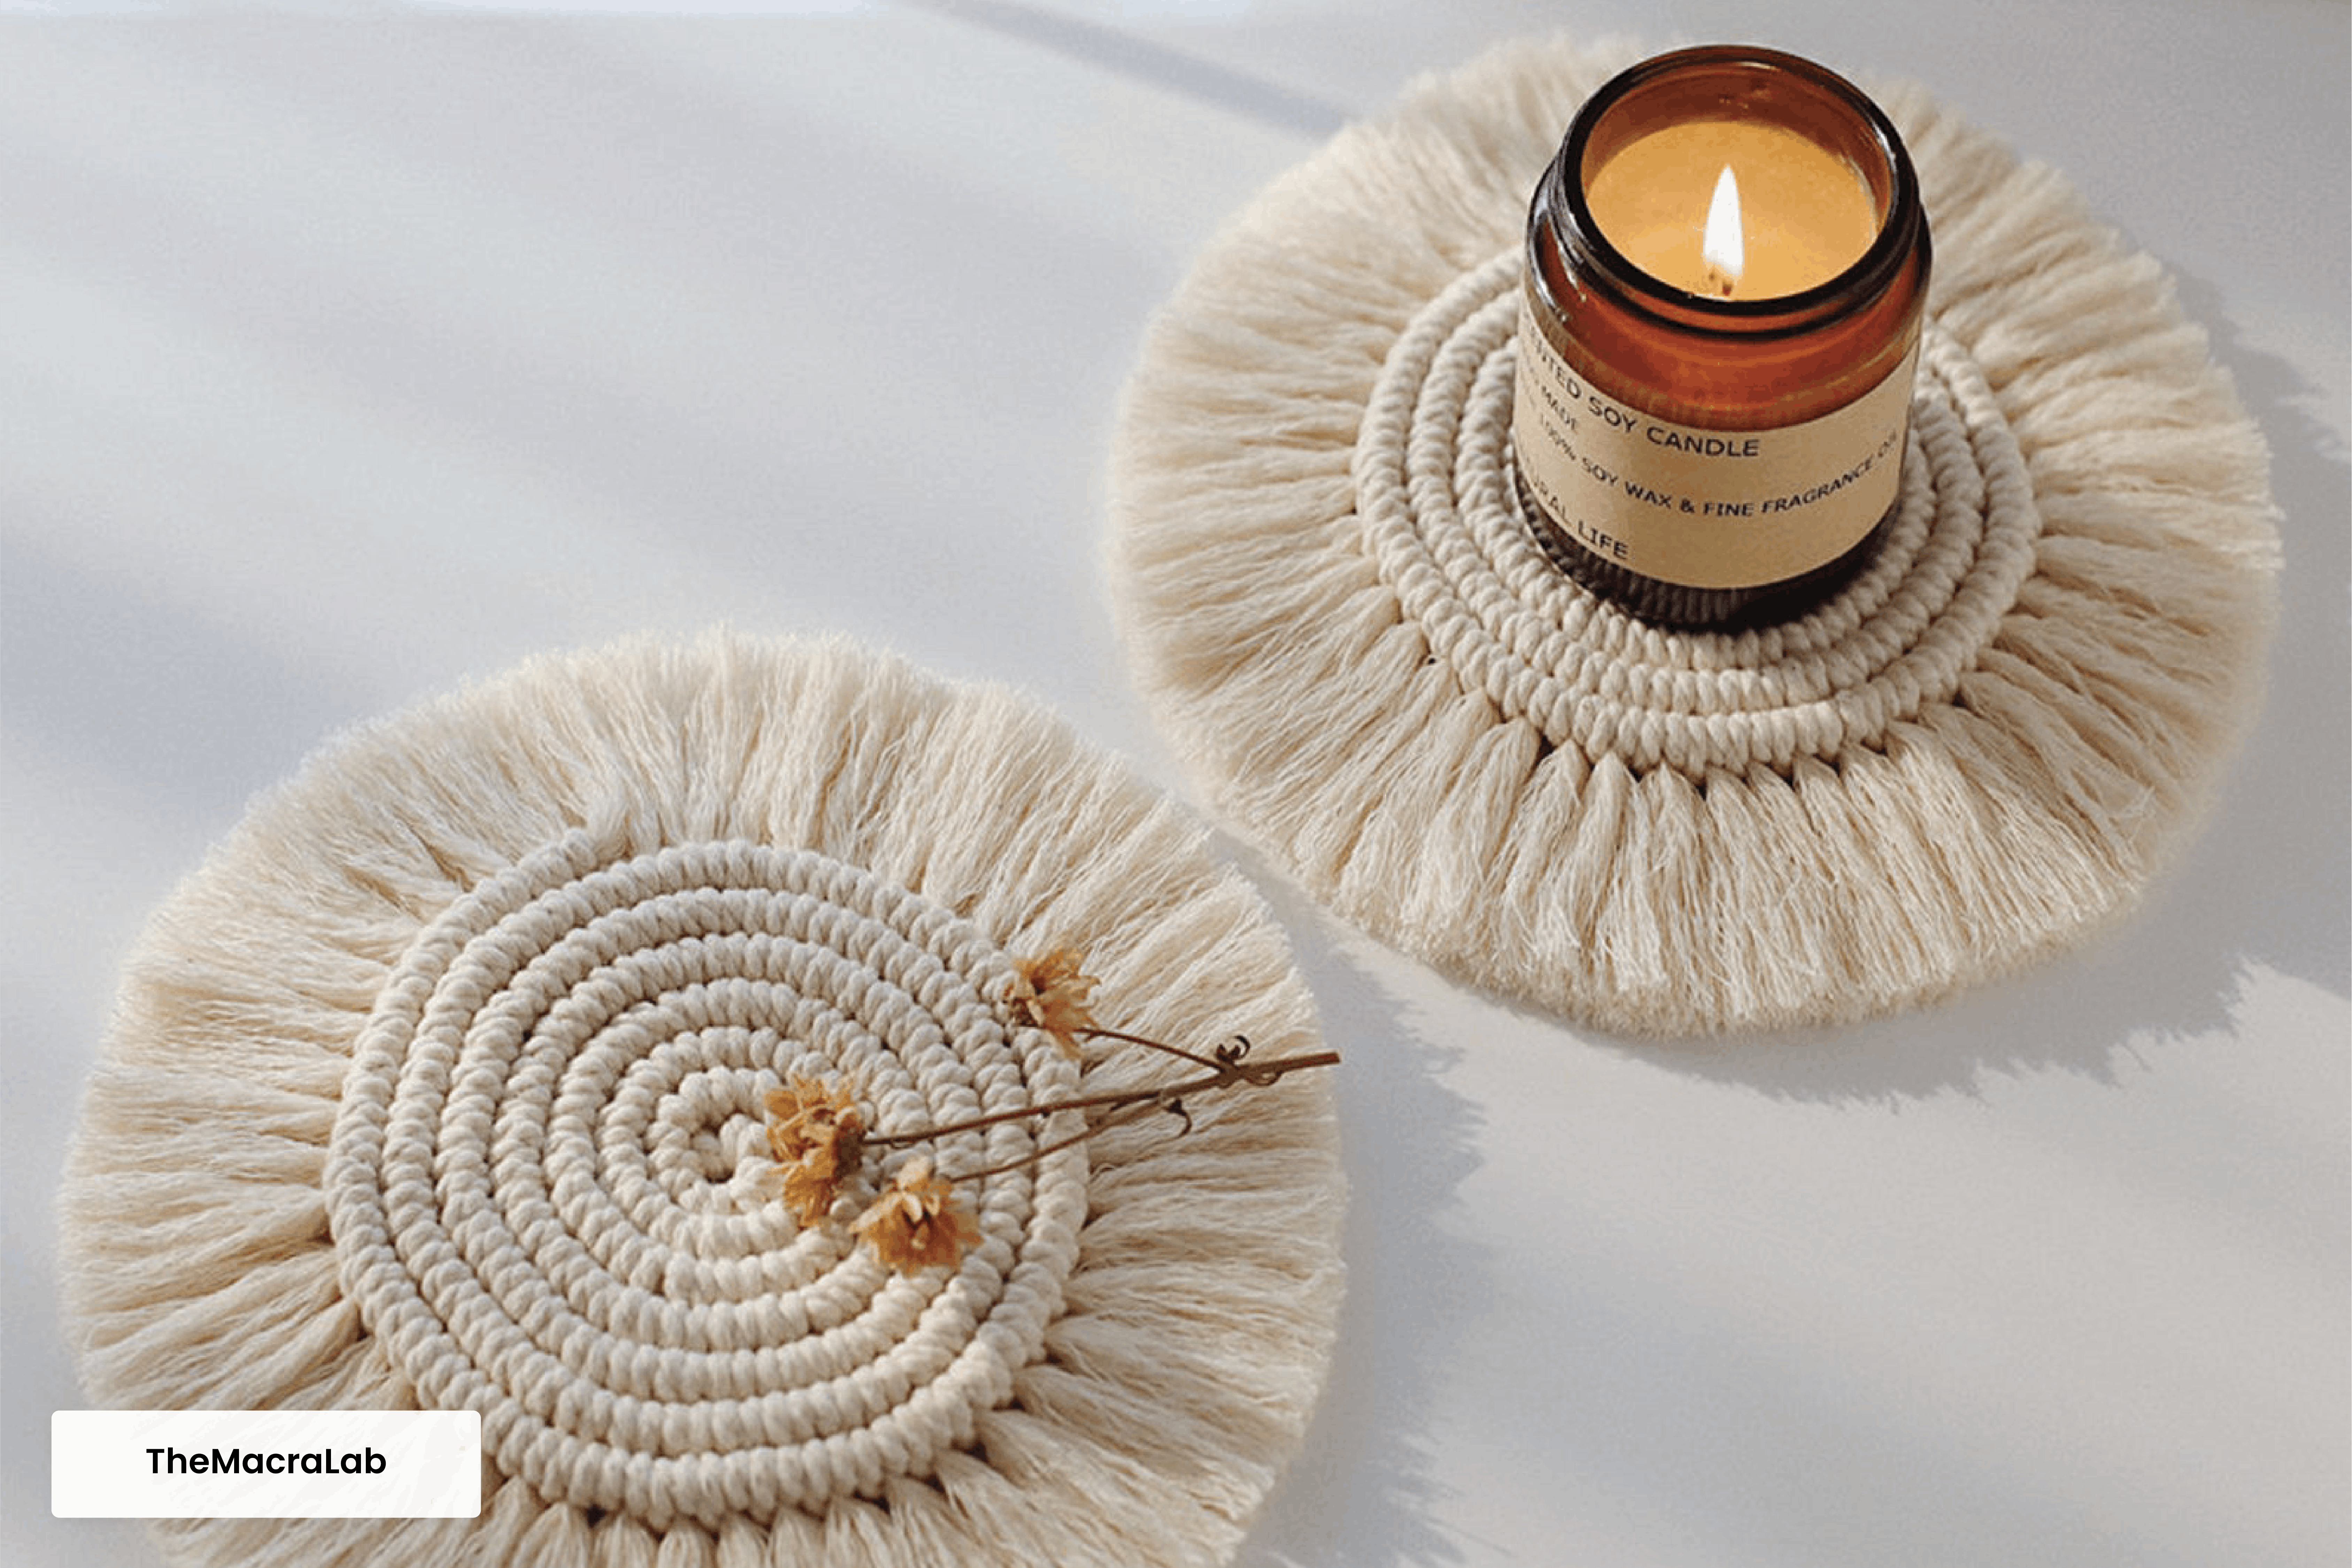  Two round macrame coasters with a candle.